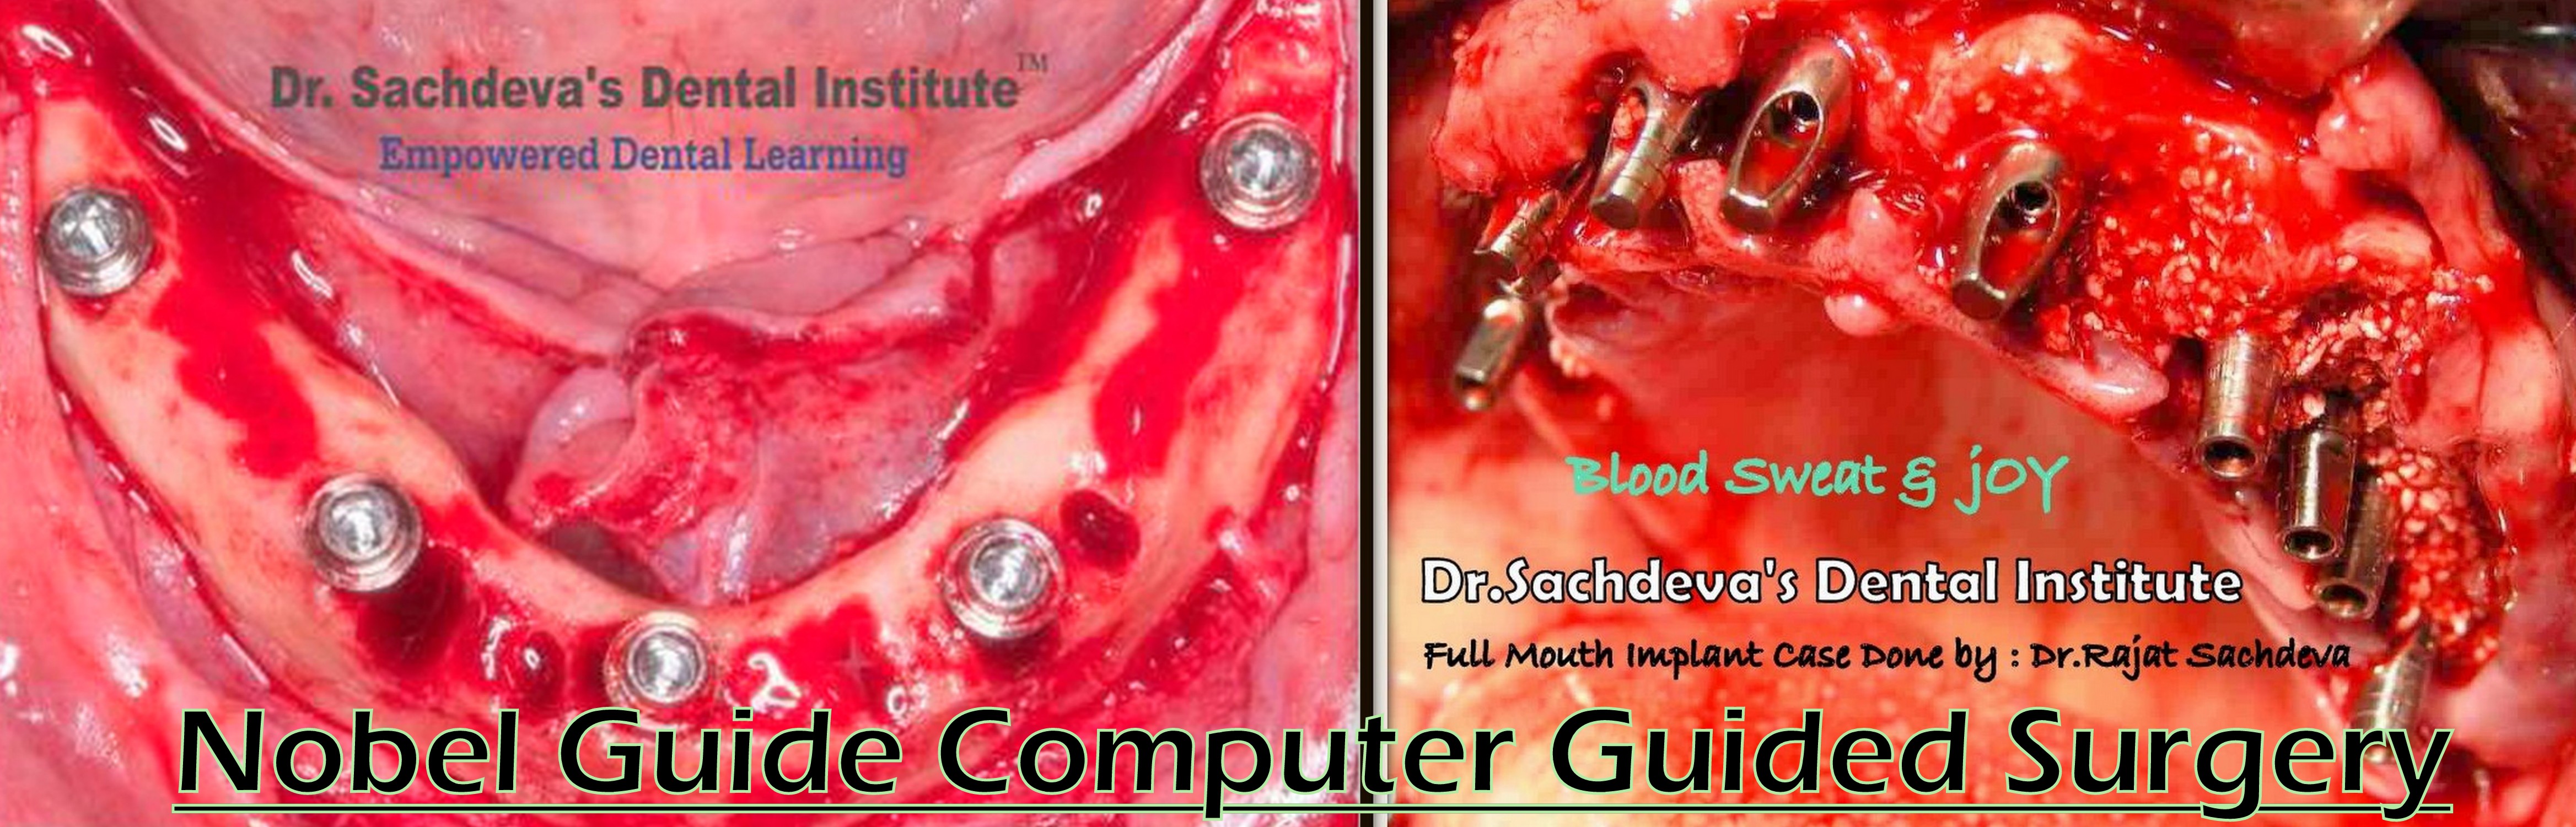 Nobel Guide Computer Guided Surgery